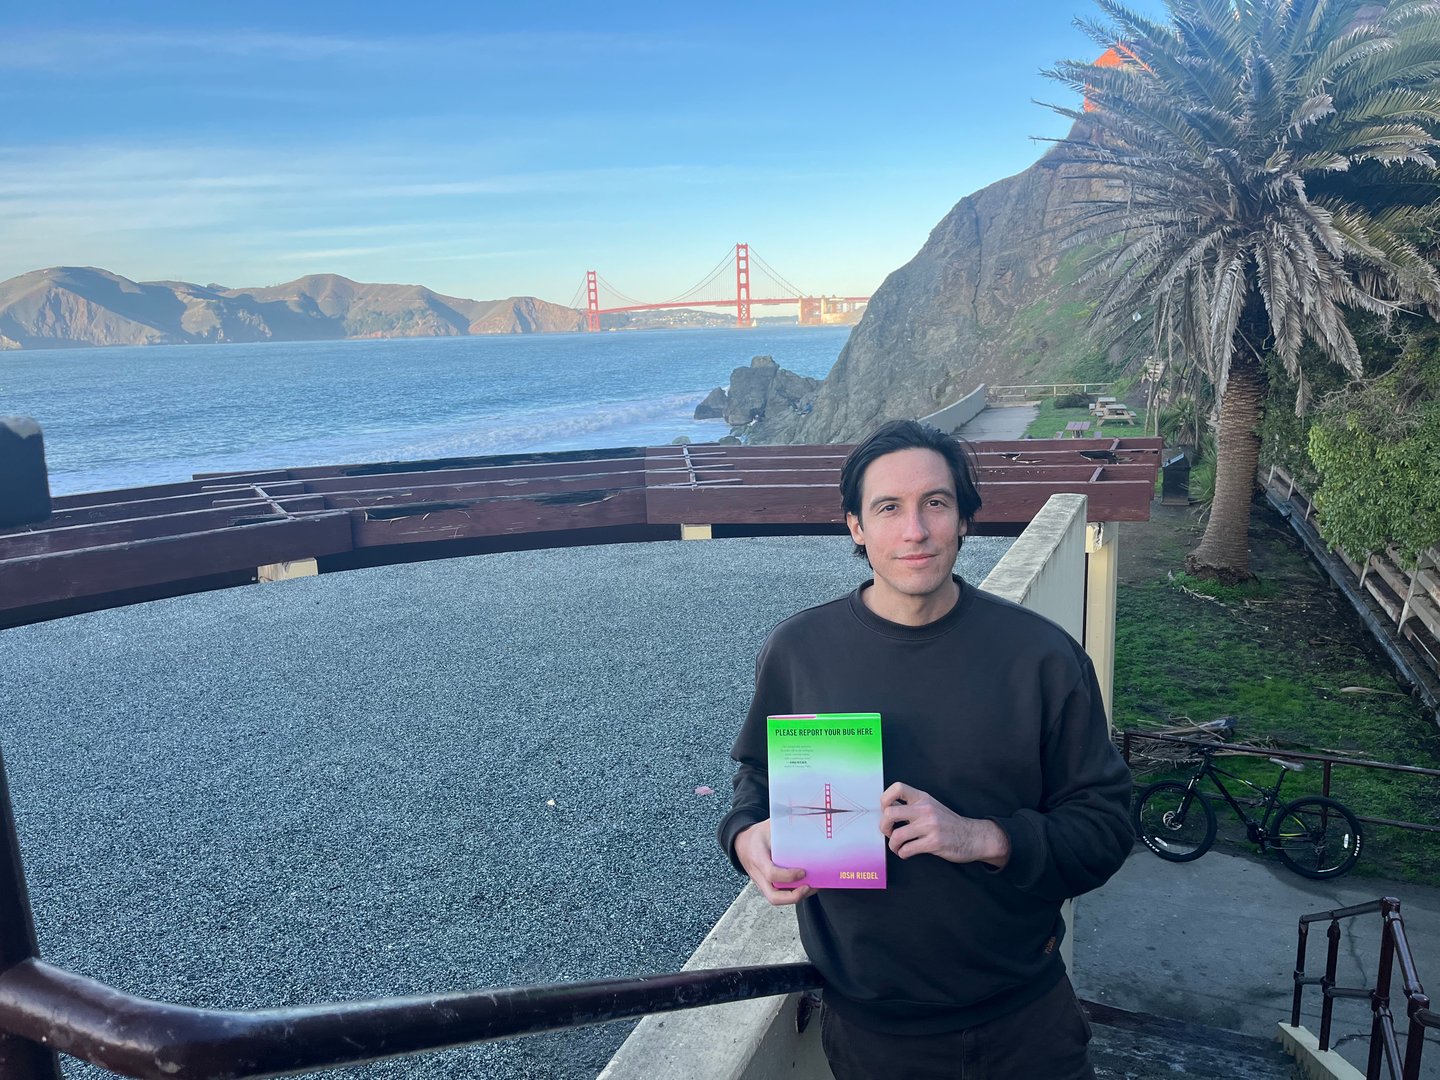 In this photograph, Josh is standing along the edge of a body of water, holding a copy of his novel. The Golden Gate Bridge is visible in the background.